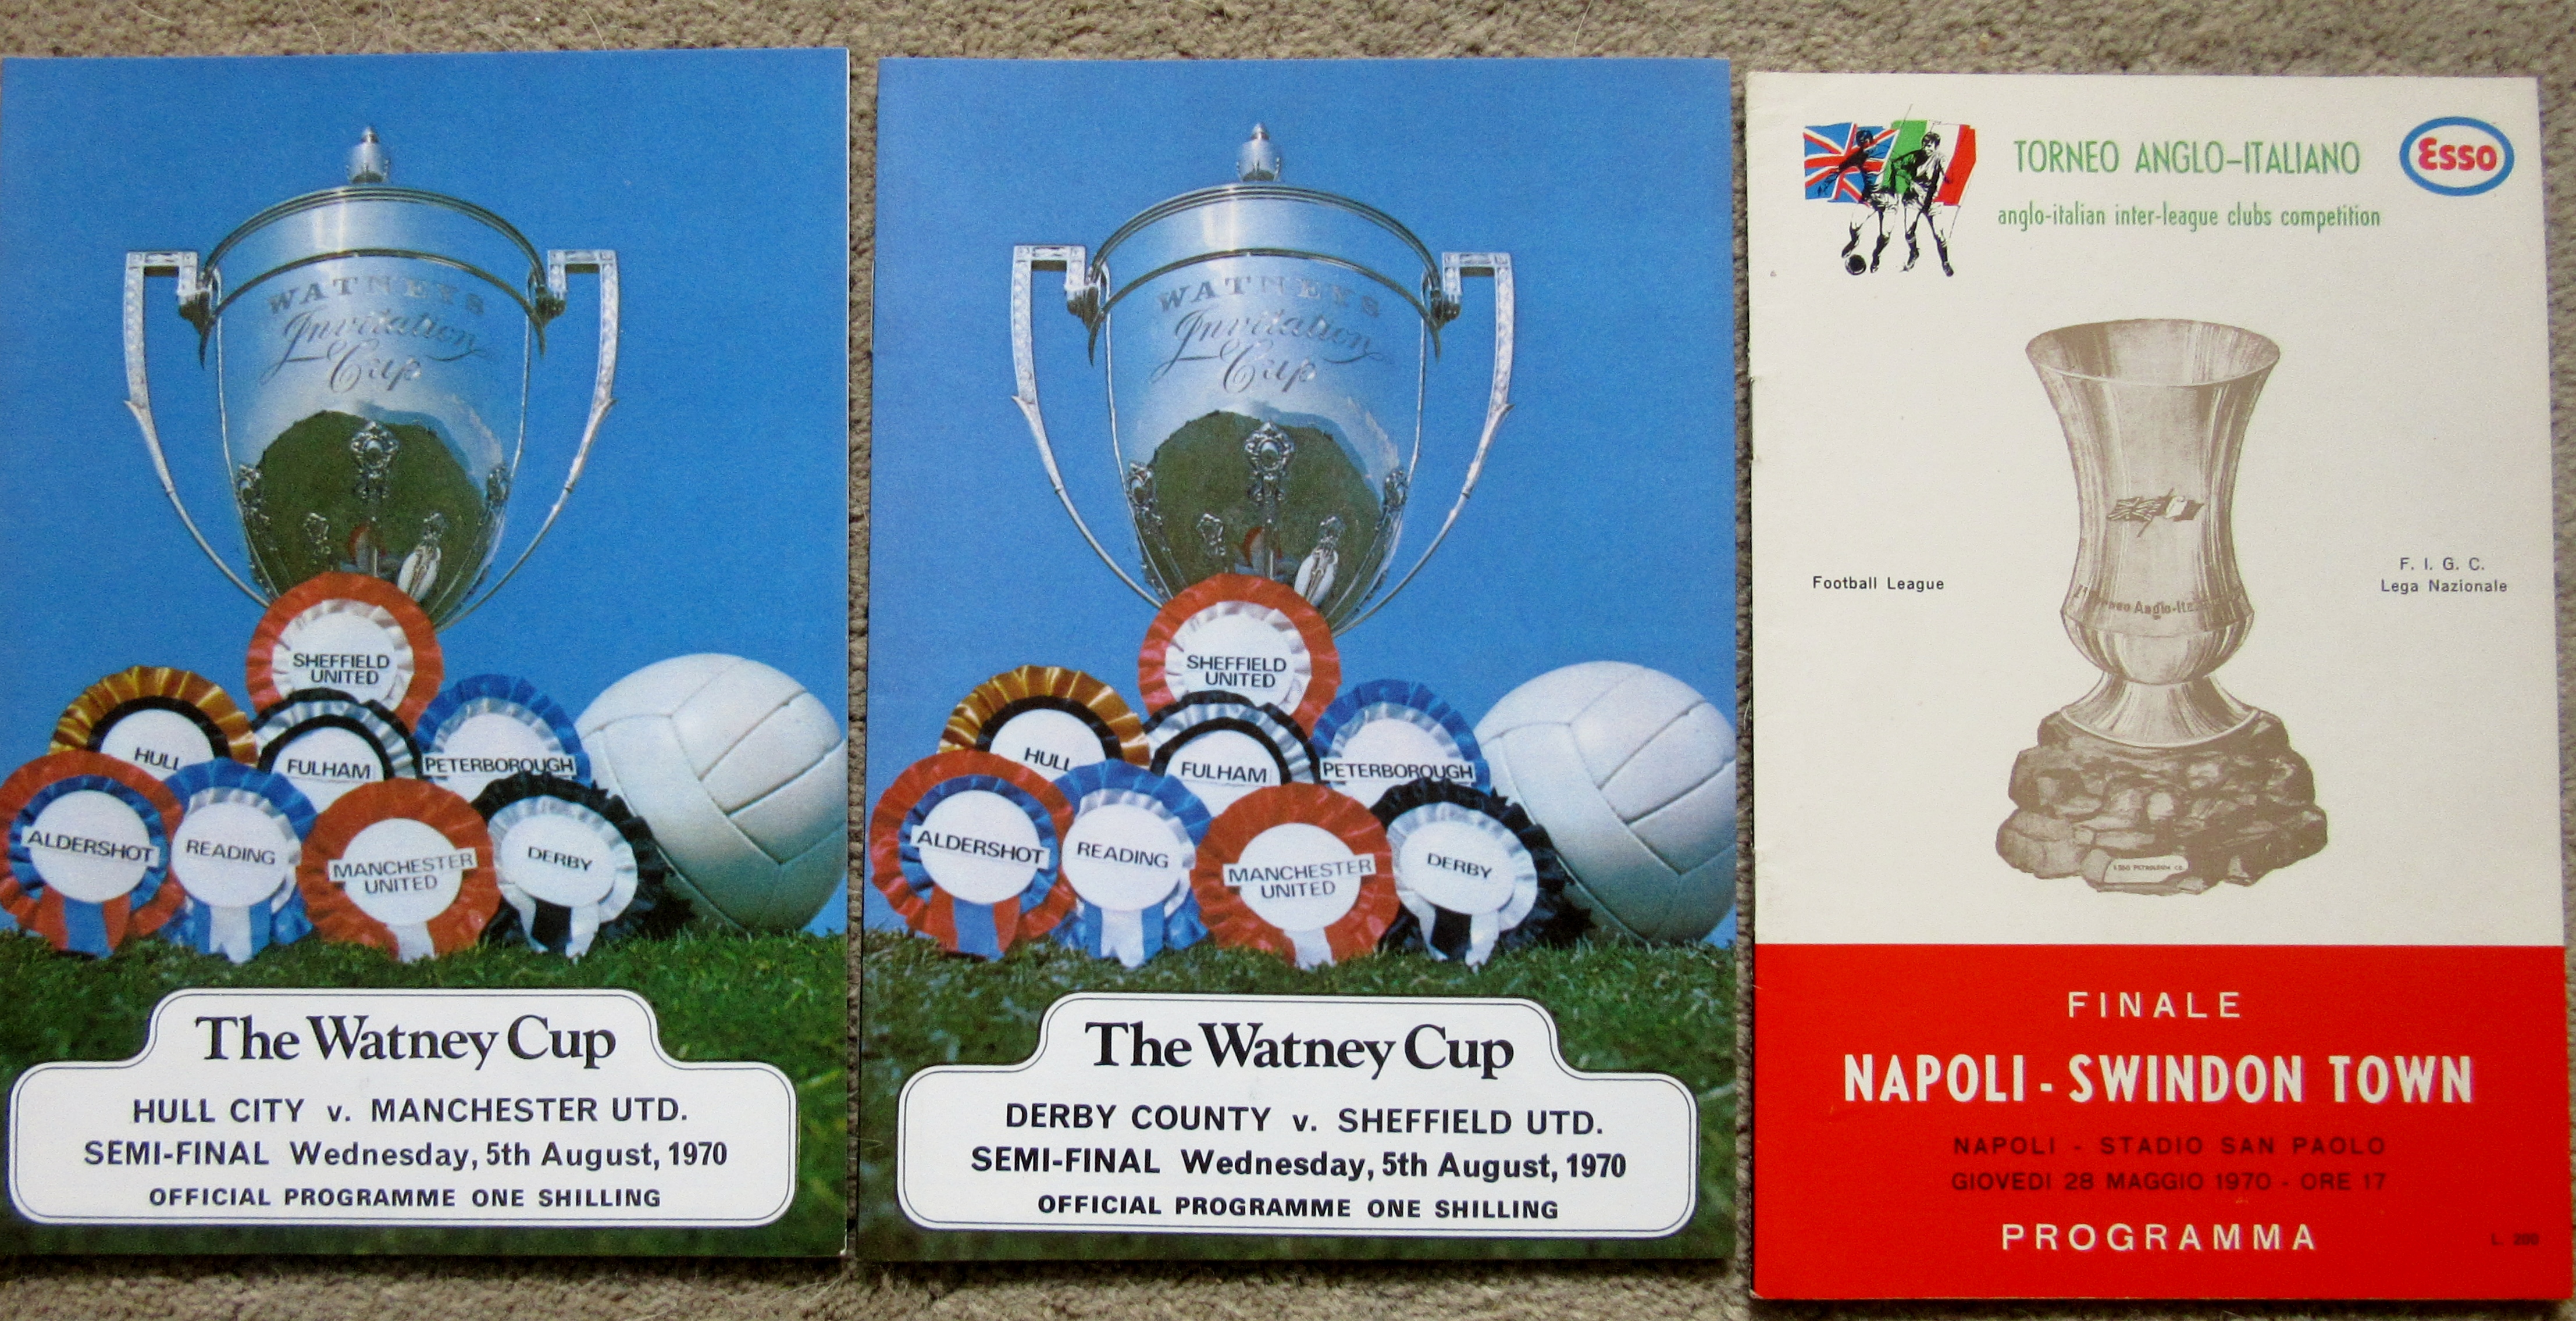 COLLECTION OF MINOR CUP PROGRAMMES - TEXACO, WATNEY, ANGLO ITALIAN ETC X 45 - Image 7 of 7